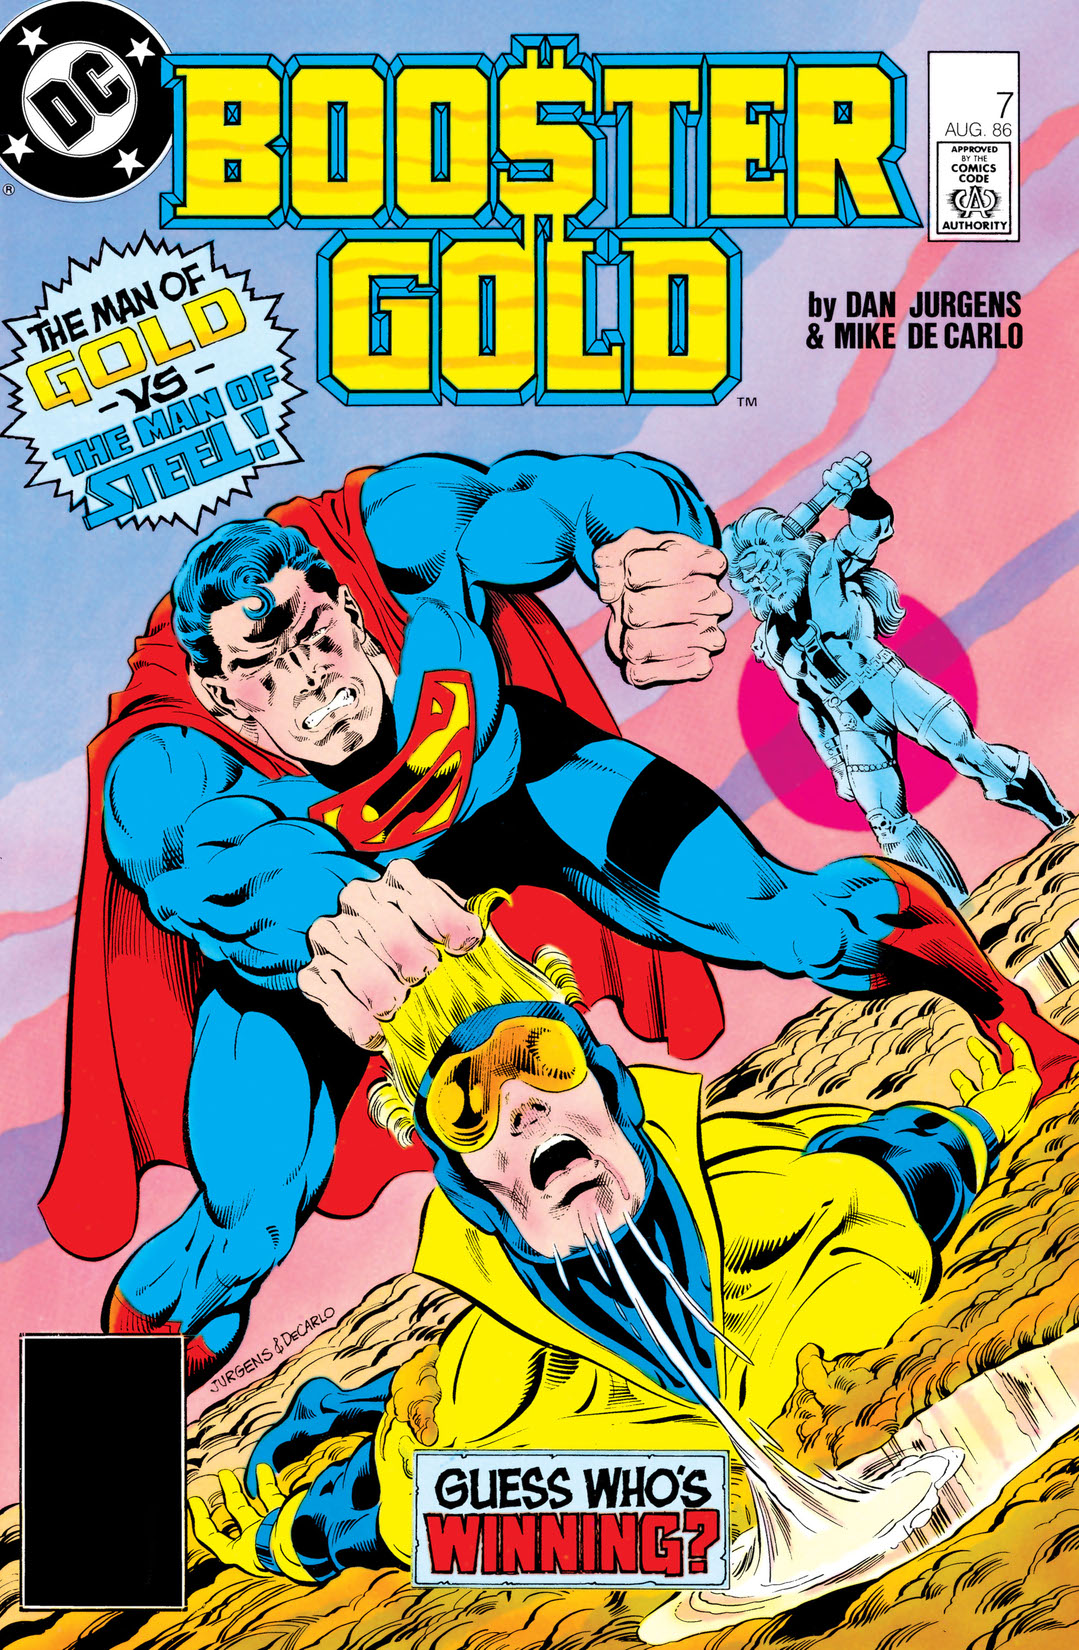 Booster Gold (1985-) #7 preview images